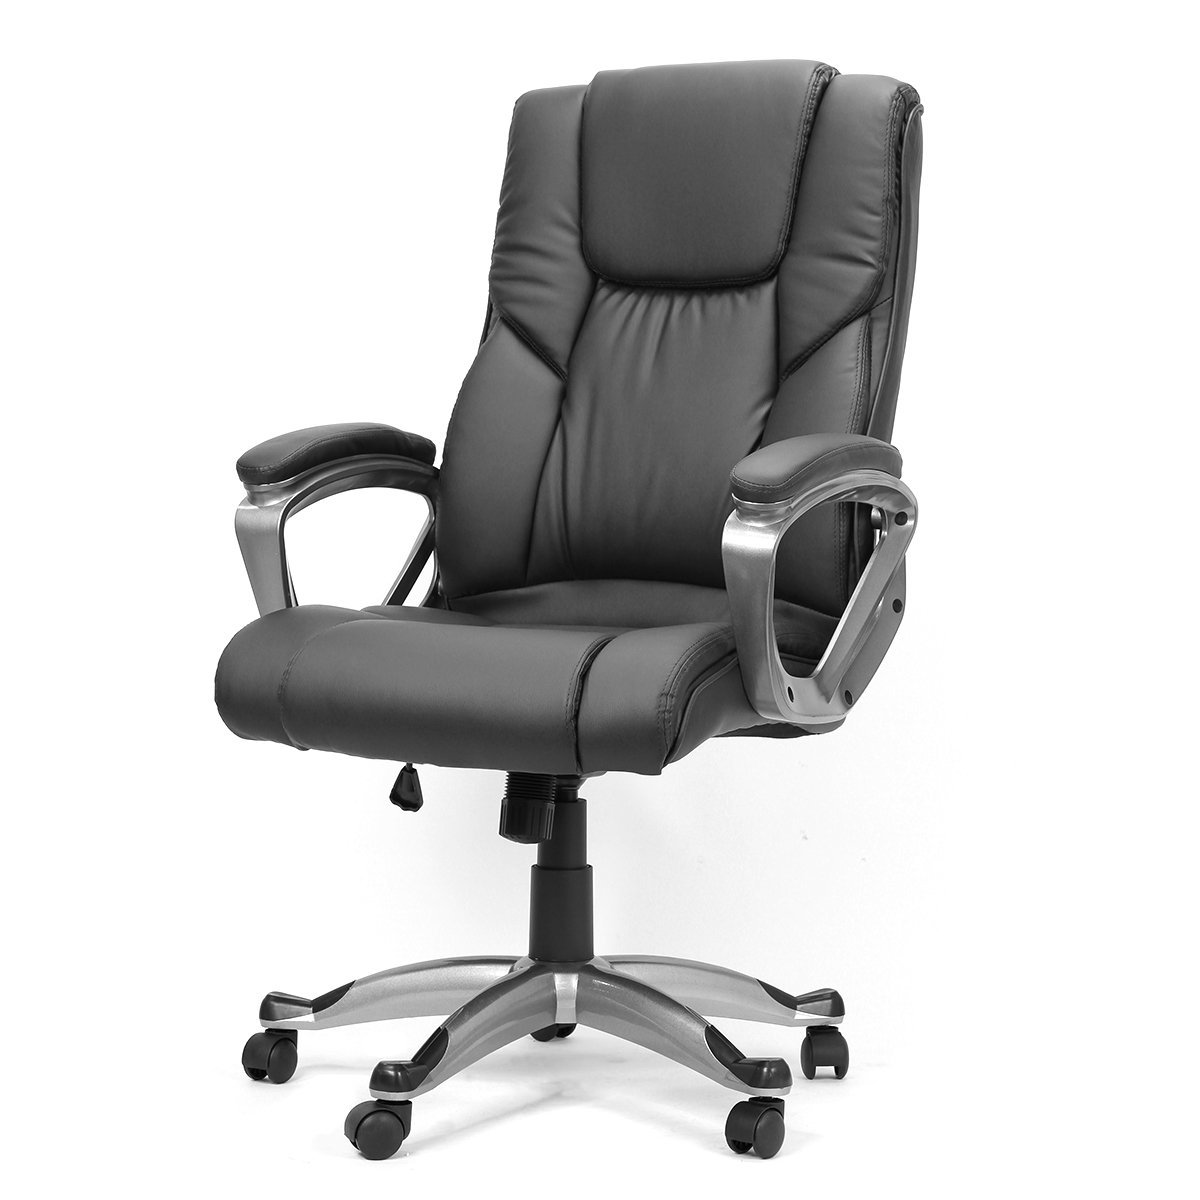 XTREMEPOWERUS PU LEATHER EXECUTIVE CHAIR